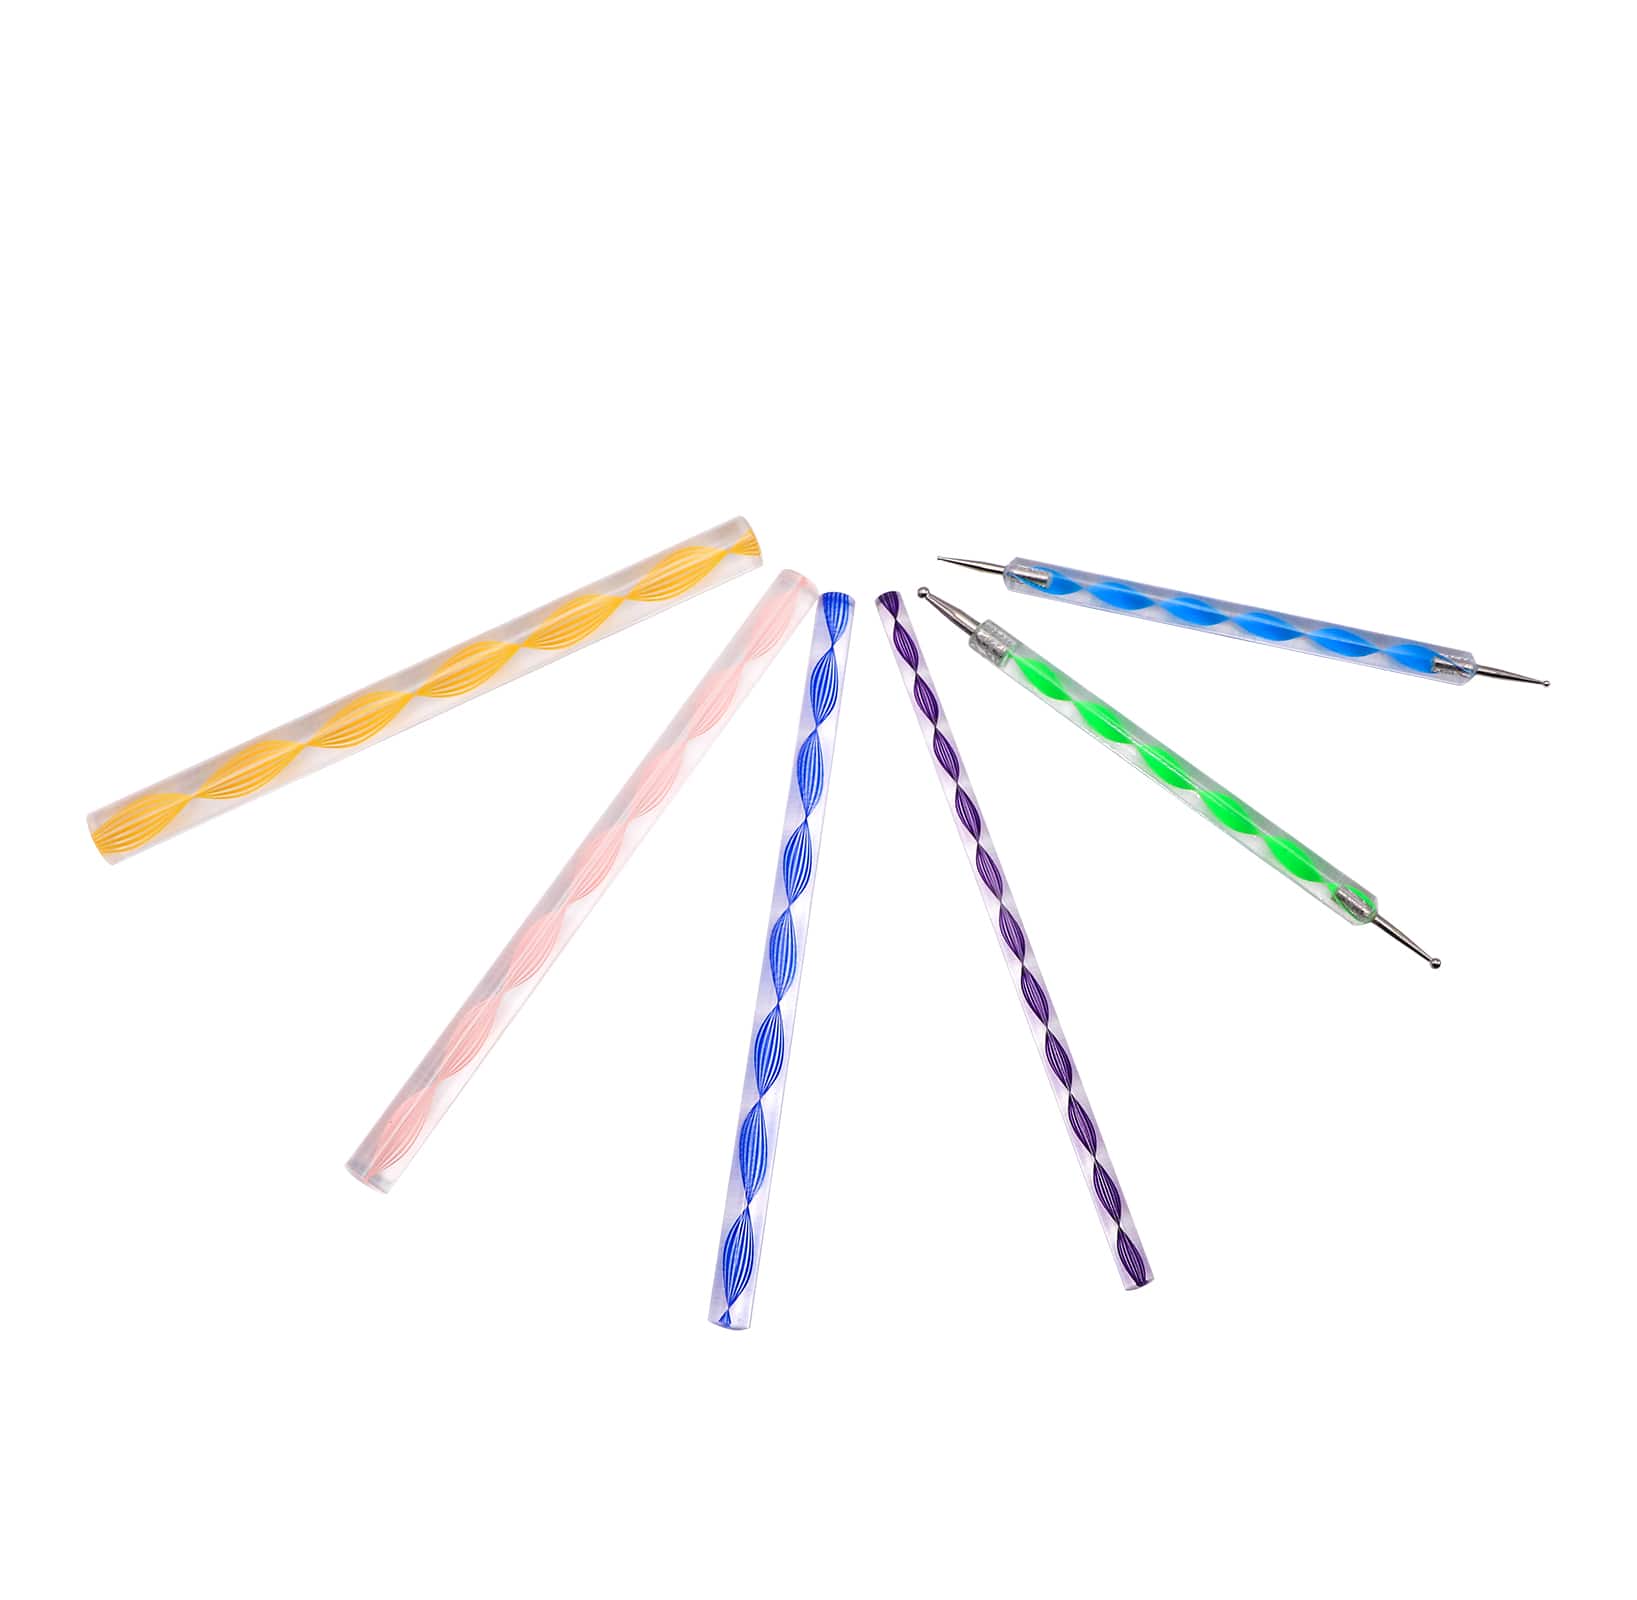 12 Pack: Mandala Dotting Tool Set with Colorful Handles by Craft Smart&#xAE;